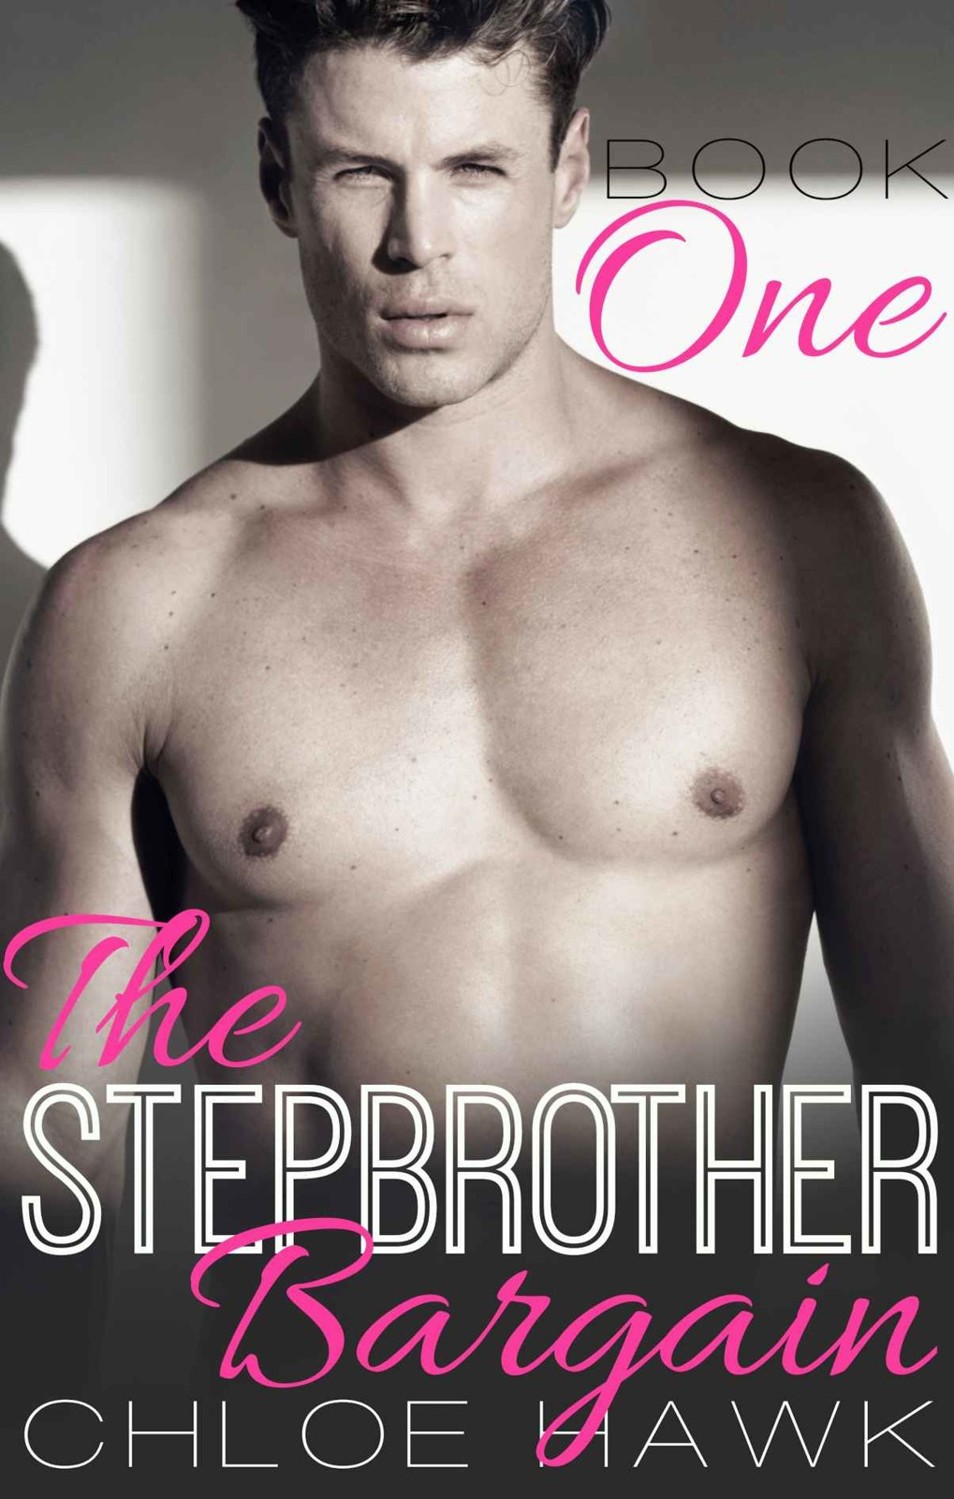 Read The Stepbrother Bargain Book 1 By Chloe Hawk Online Free Full Book 2646